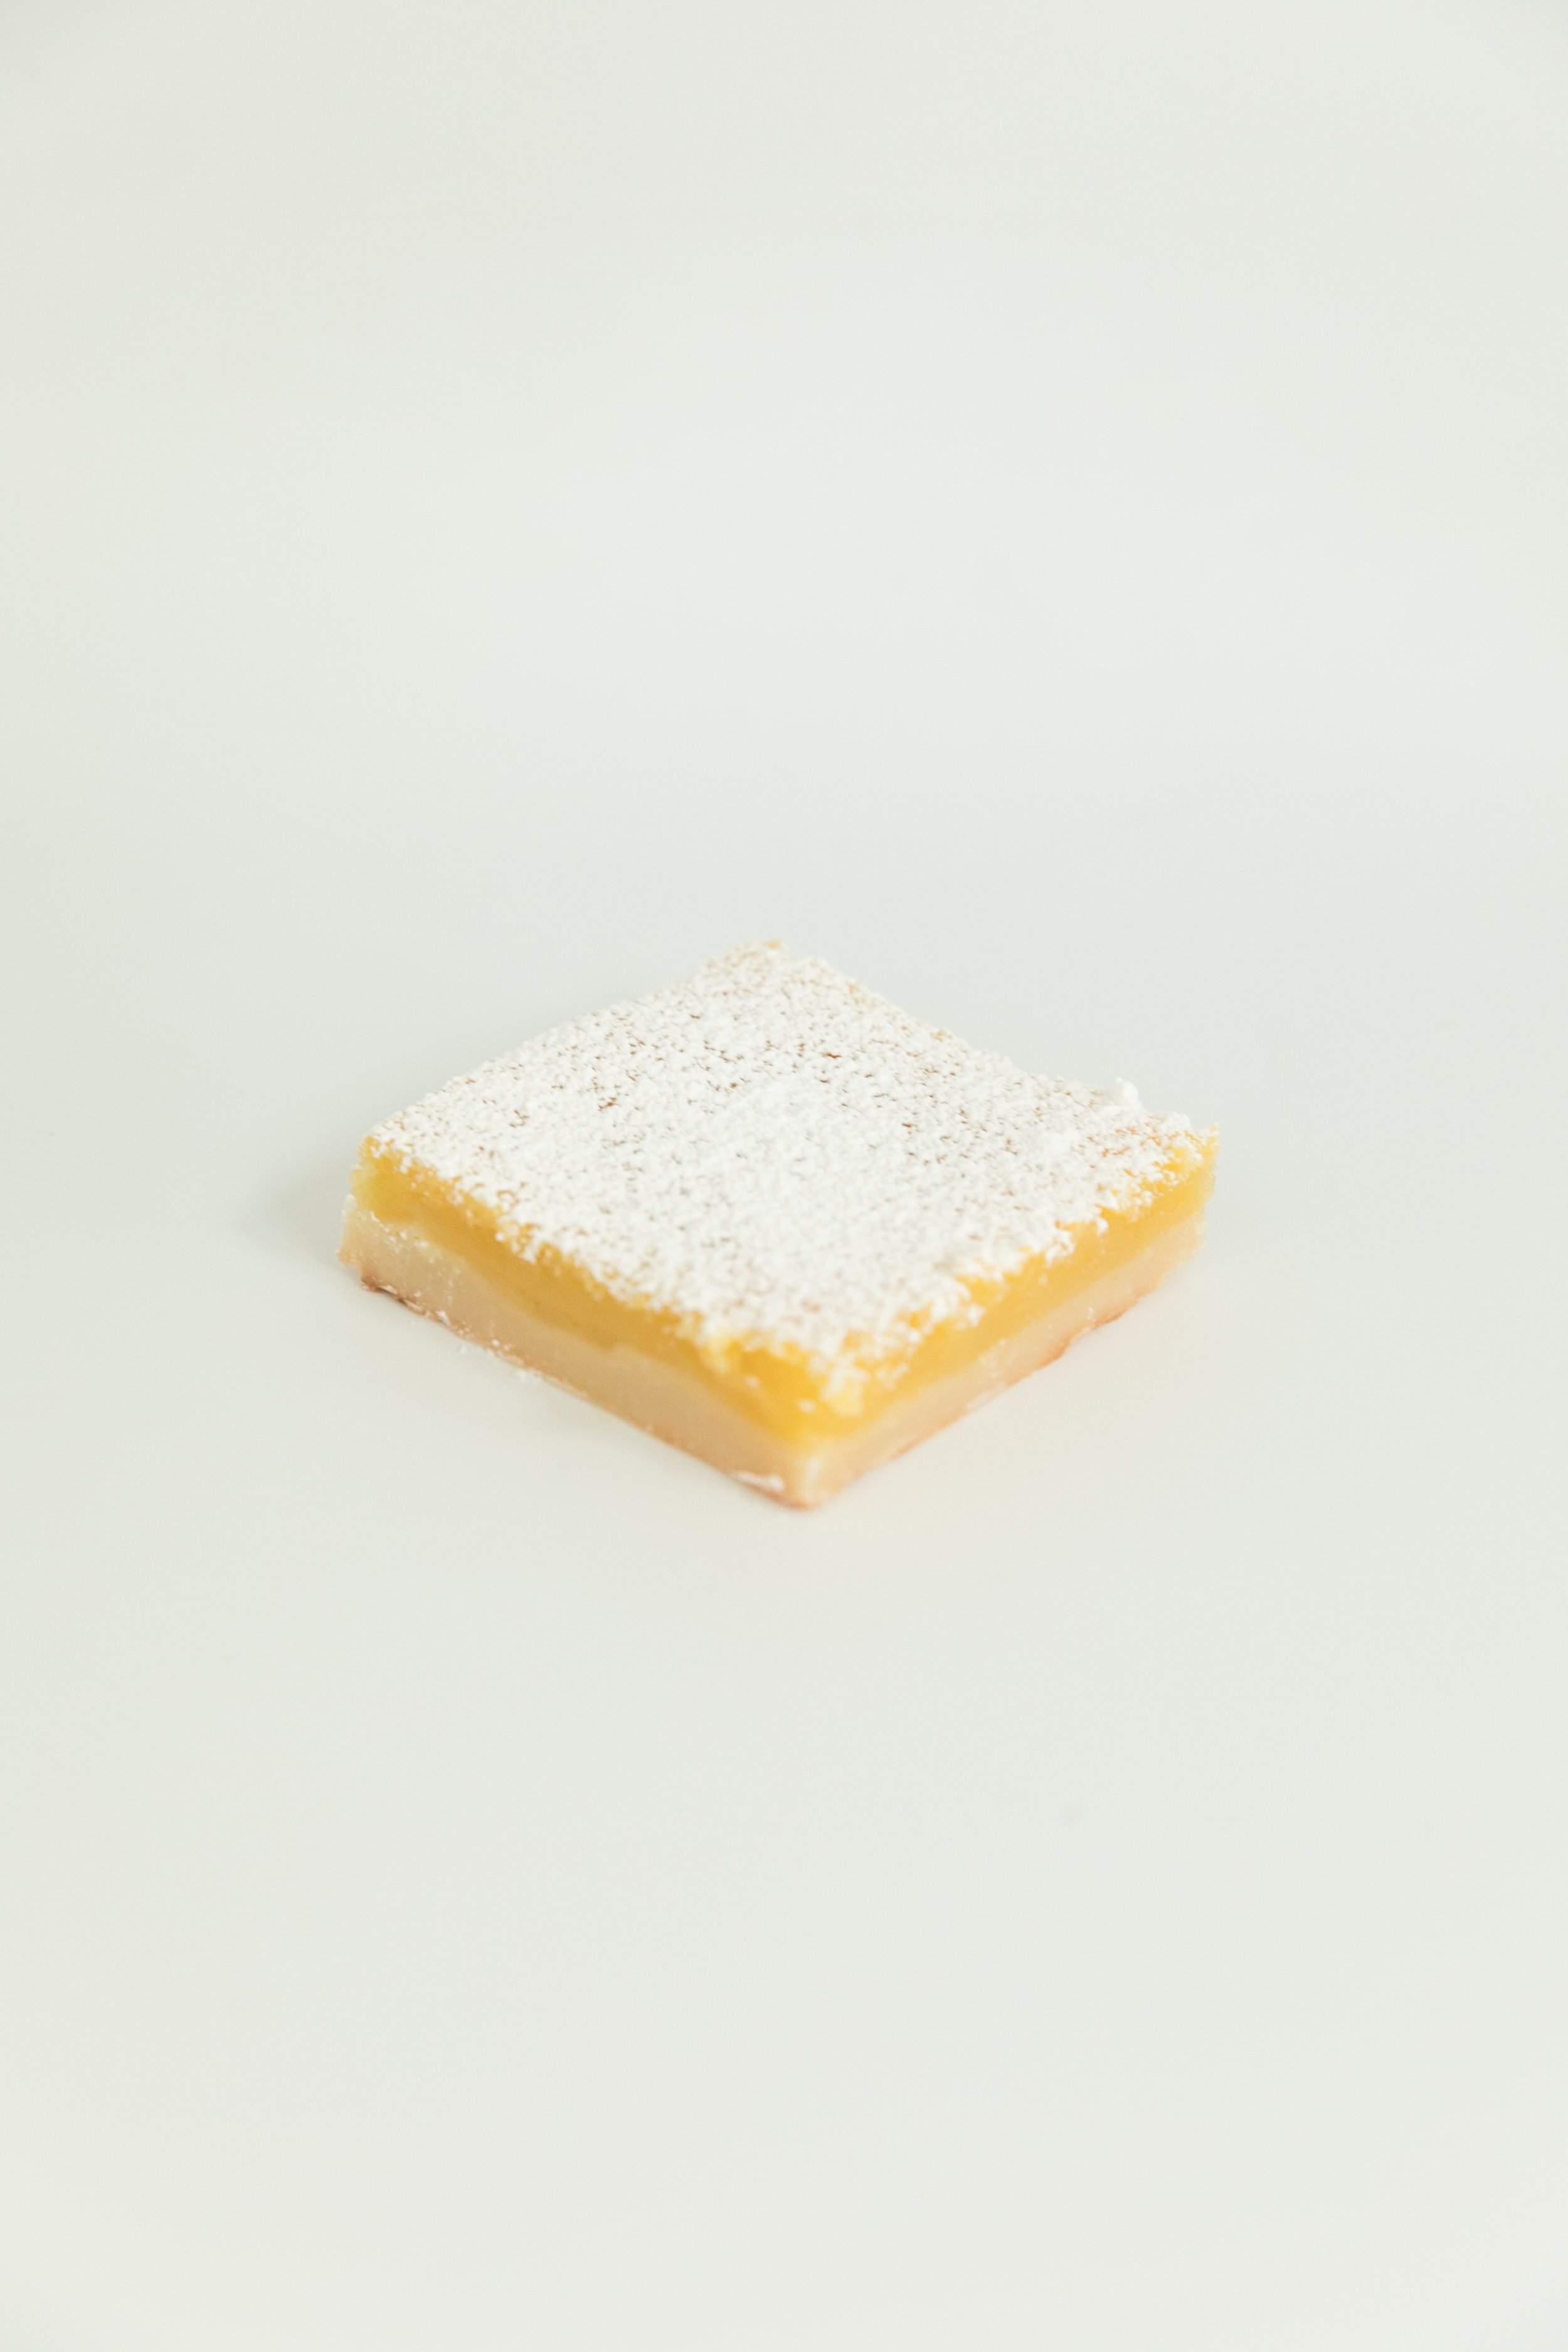  lemon bar topped with a powdered sugar sprinkle 